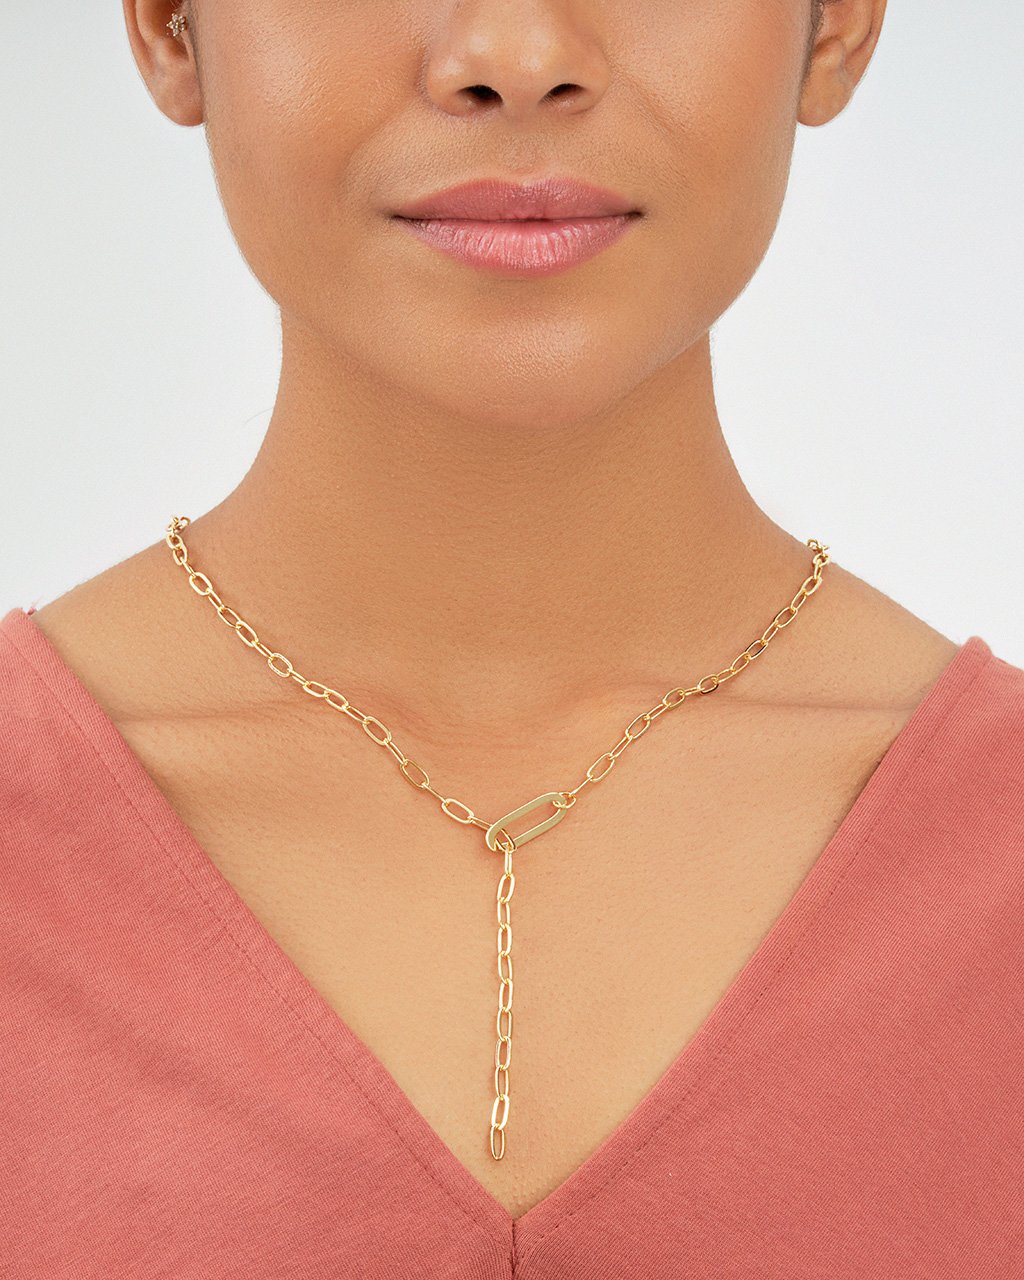 Chain Link Lariat Necklace Necklace Sterling Forever 